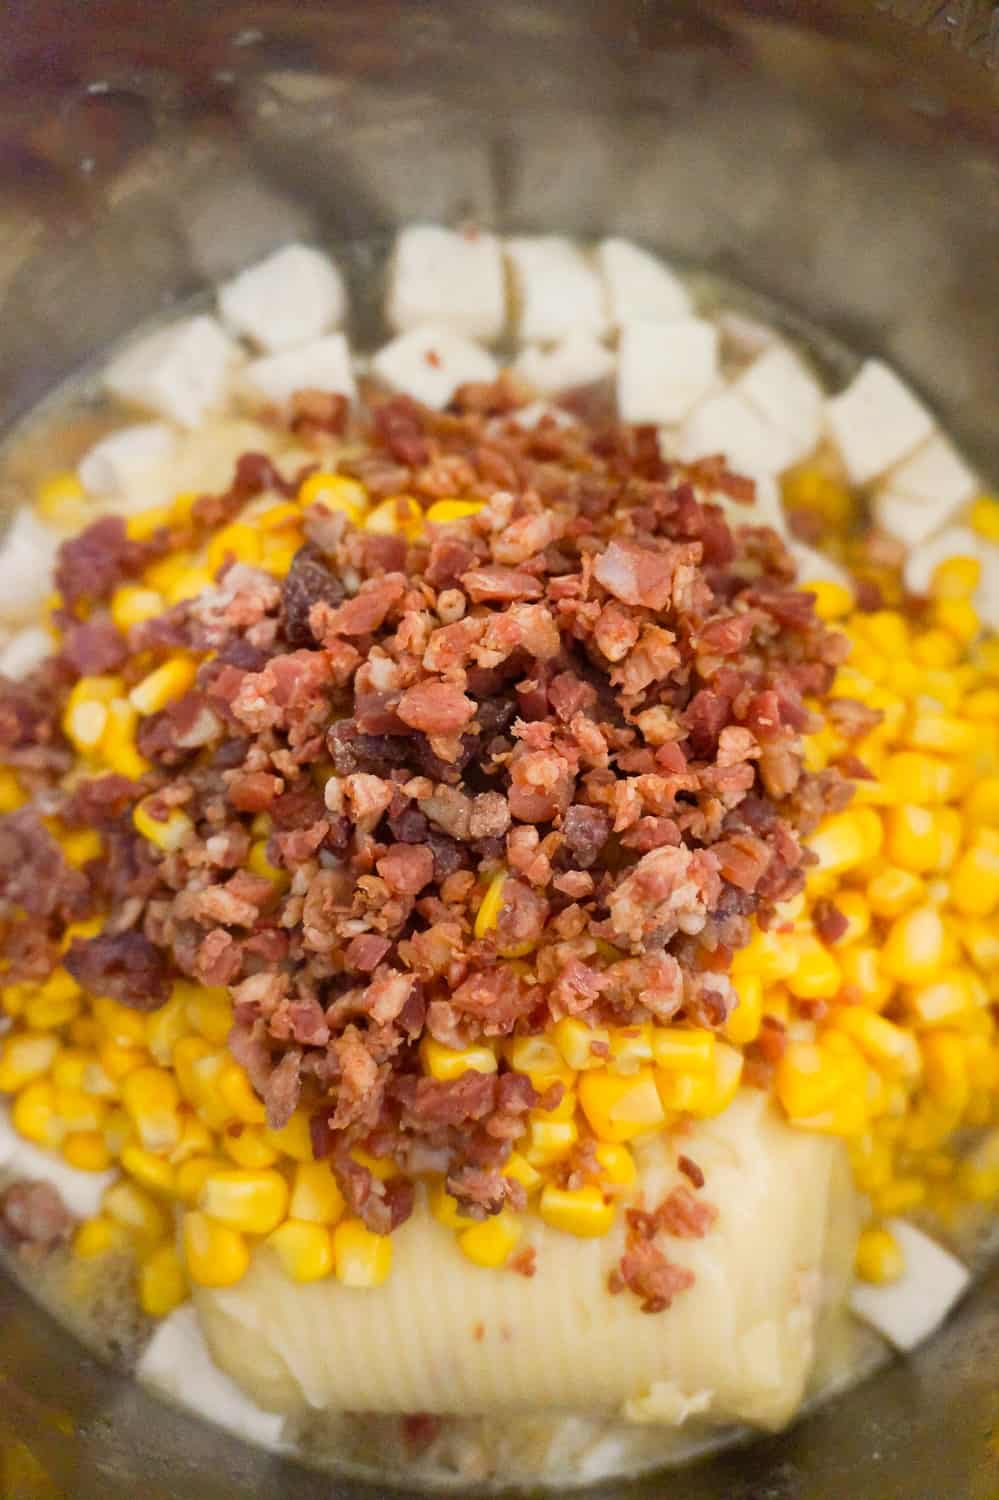 real bacon bits, sweet corn and Pillsbury biscuit dough pieces in an Instant Pot